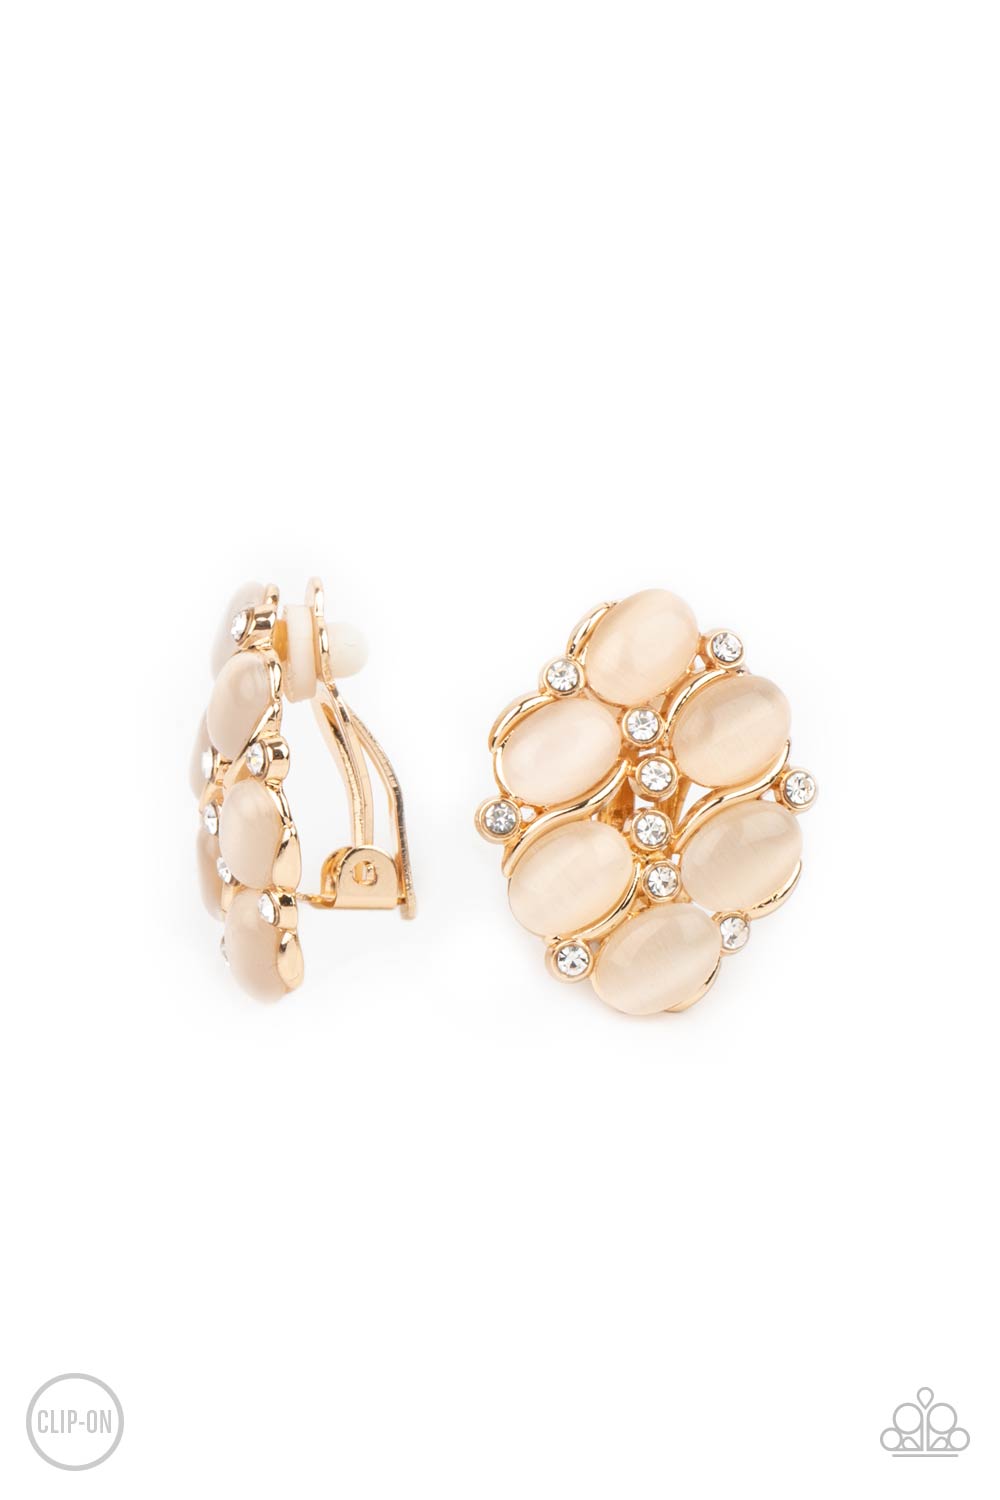 Row, Row, Row Your YACHT - Gold Clip On Earrings - Paparazzi Accessories